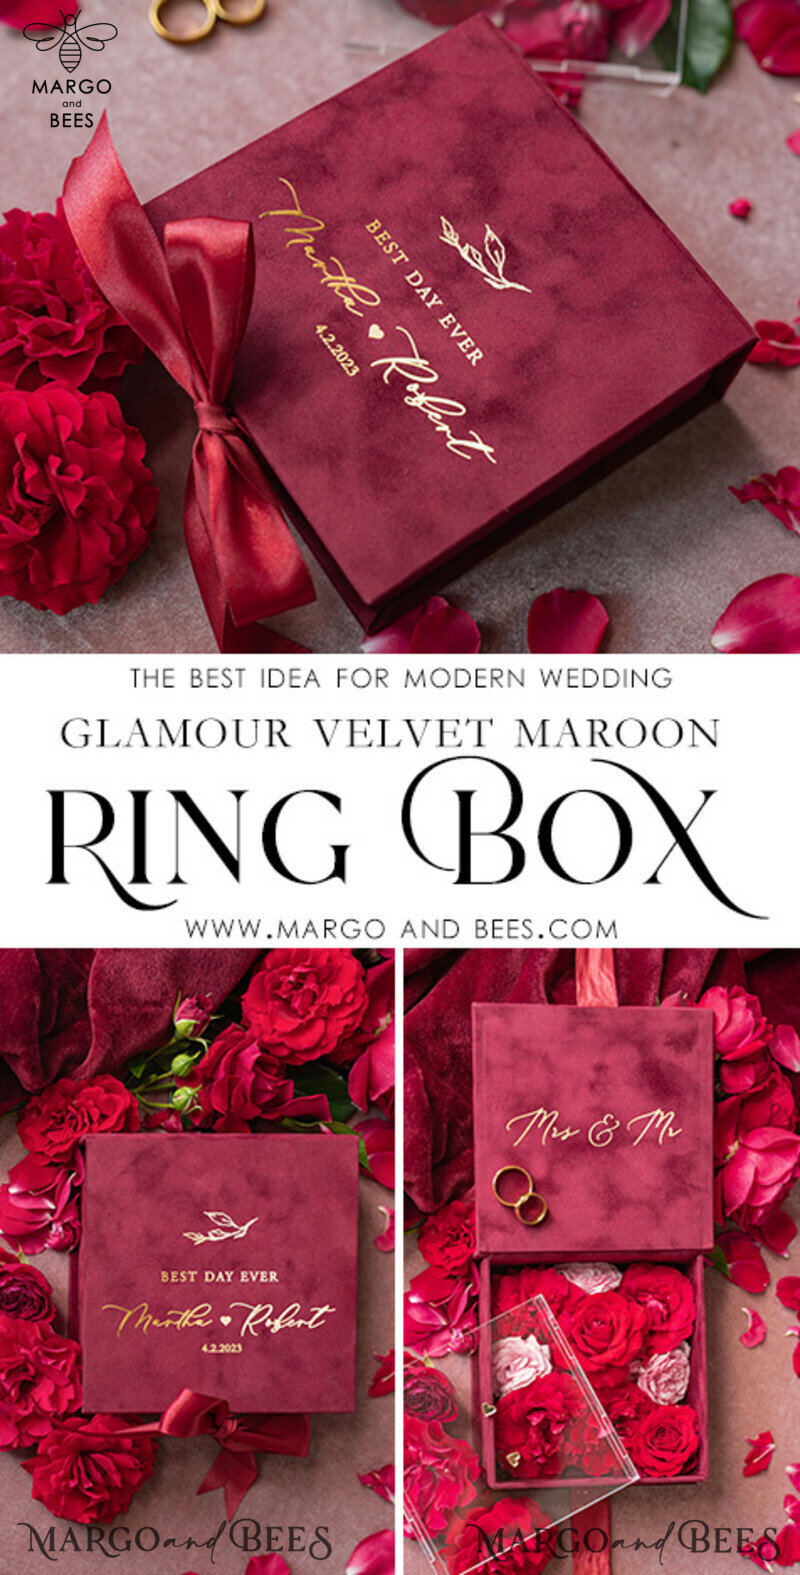 Luxurious Marsala Gold Velvet Acrylic Wedding Rings Box: A Glamorous Maroon and Gold Touch for your Special Day-3